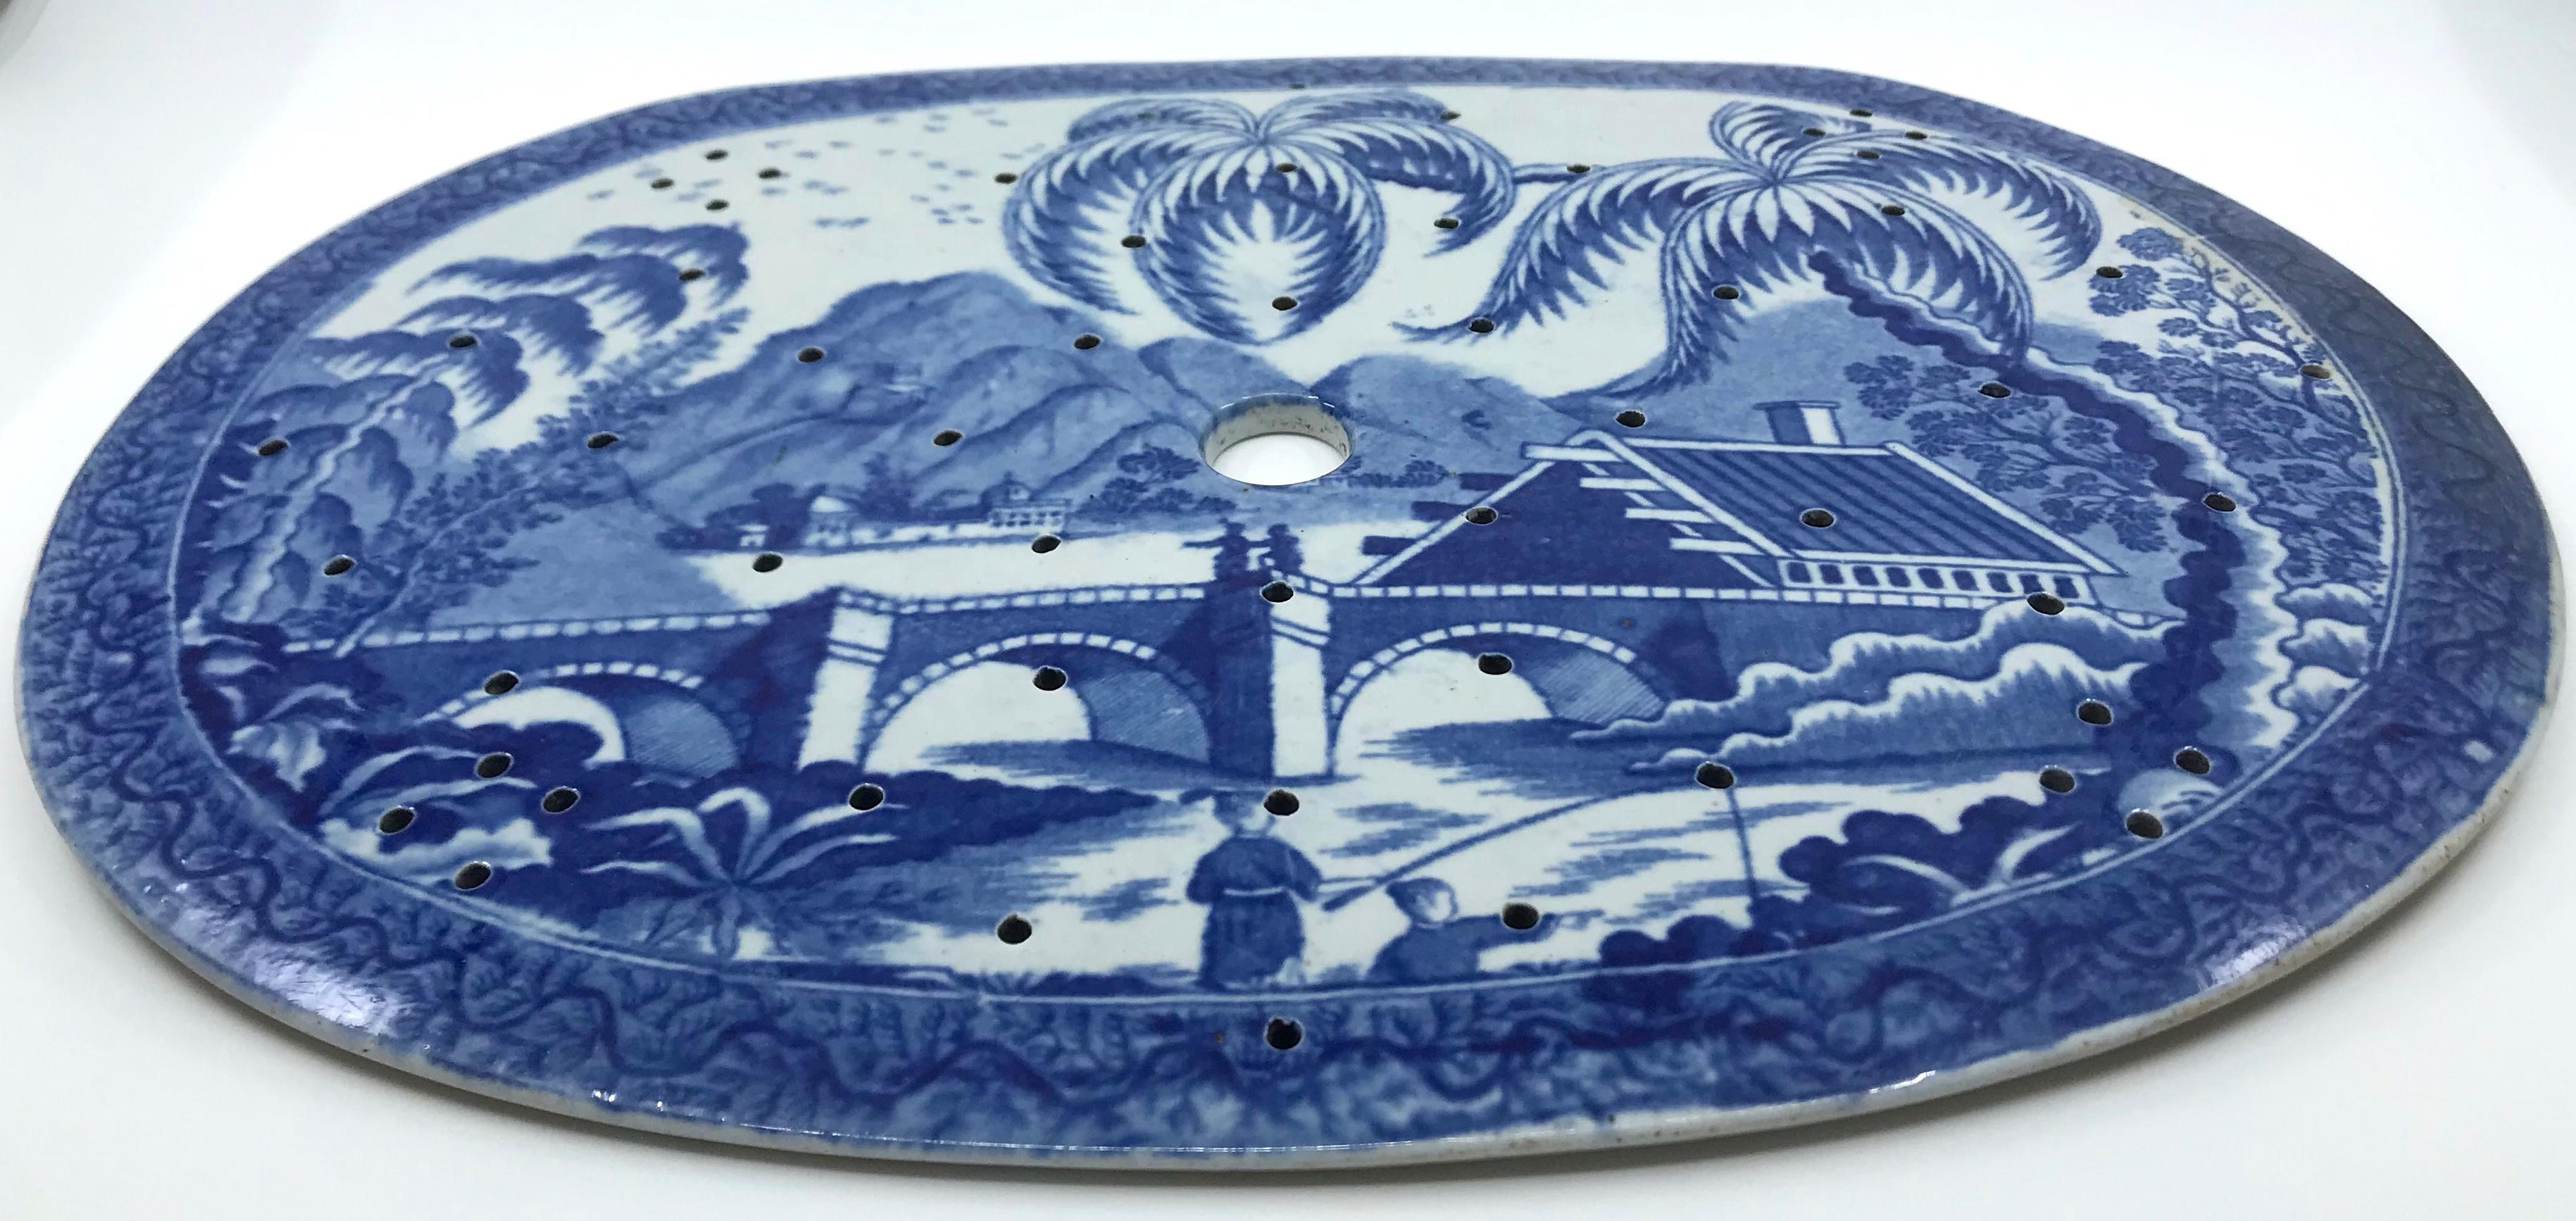 Large blue and white chinoiserie strainer. Substantial and rare early Worcester strainer with strong blue and white chinoiserie scene with figures on covered bridge with large palm trees and mountains in distance all framed by blue banded rim.